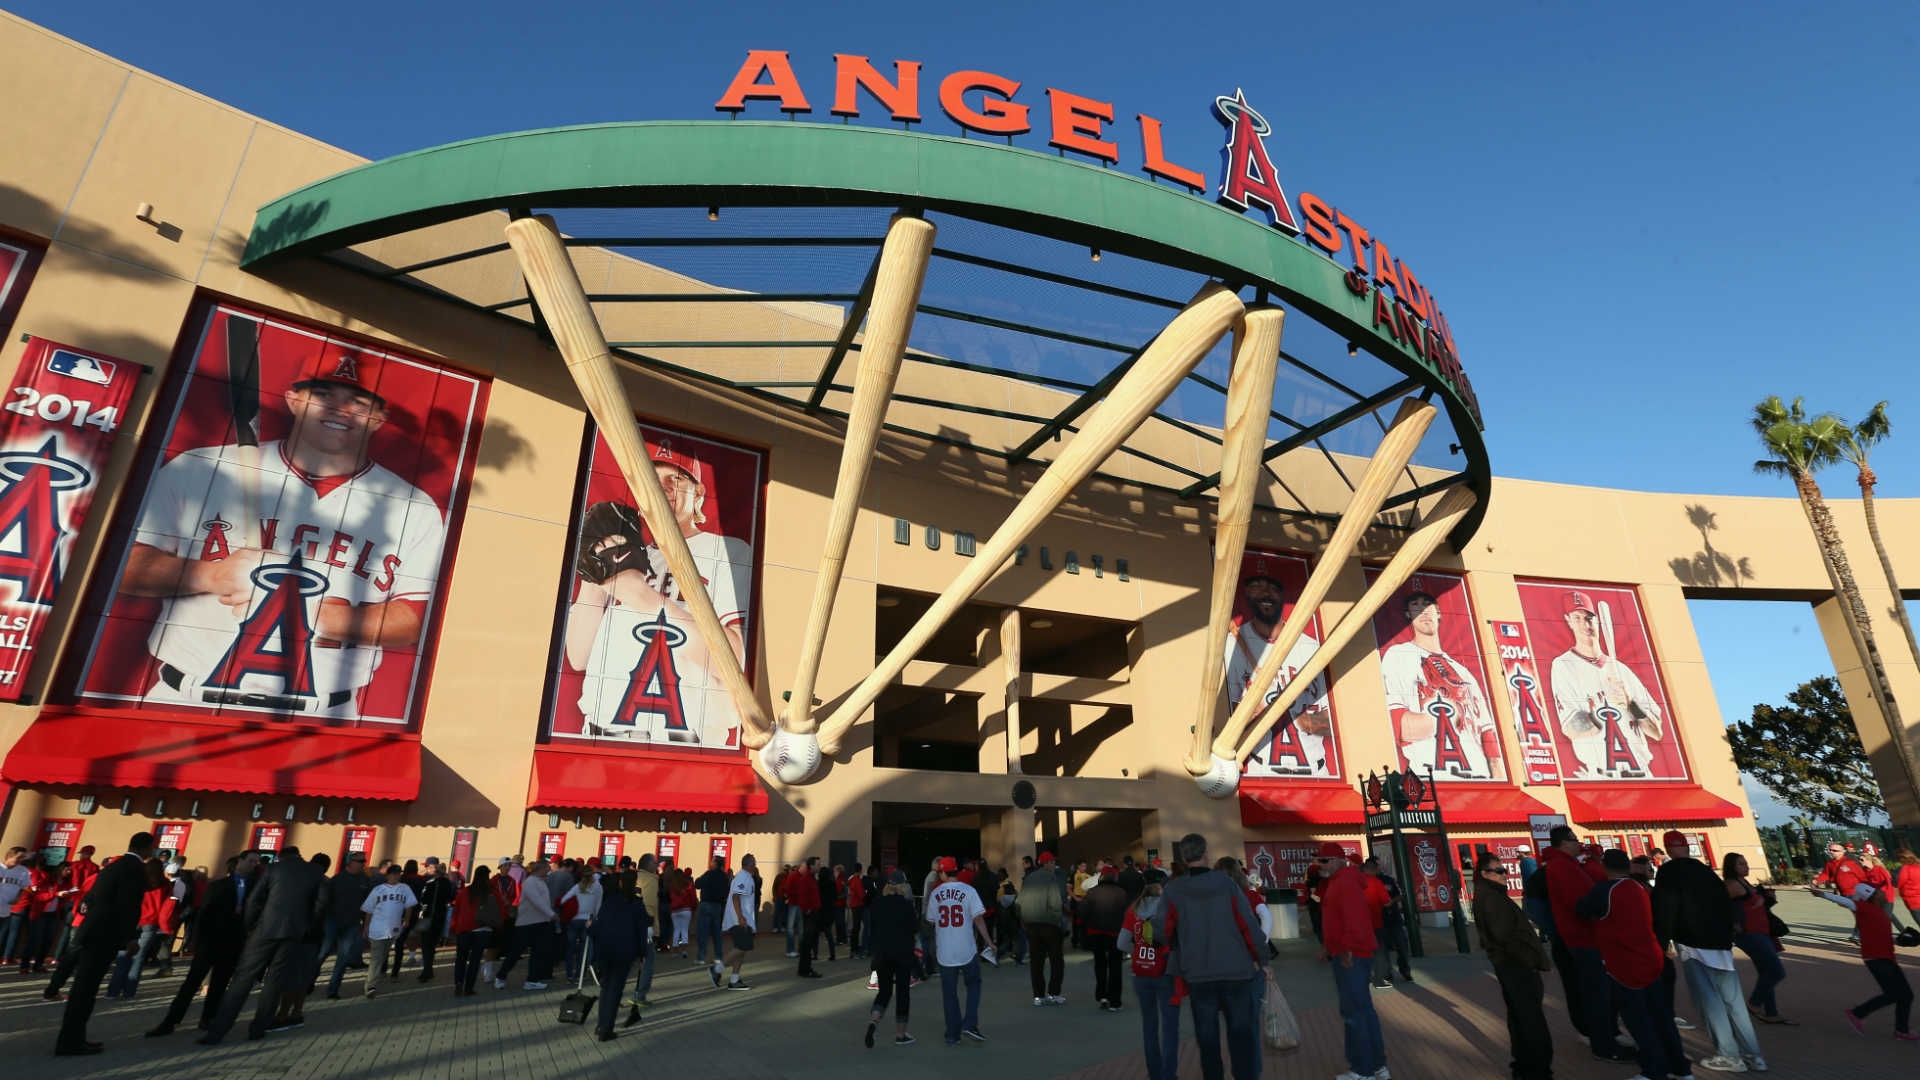 Angel Stadium, which has served as the home of the Angels since 1966, is the fourth-oldest ballpark in the majors.